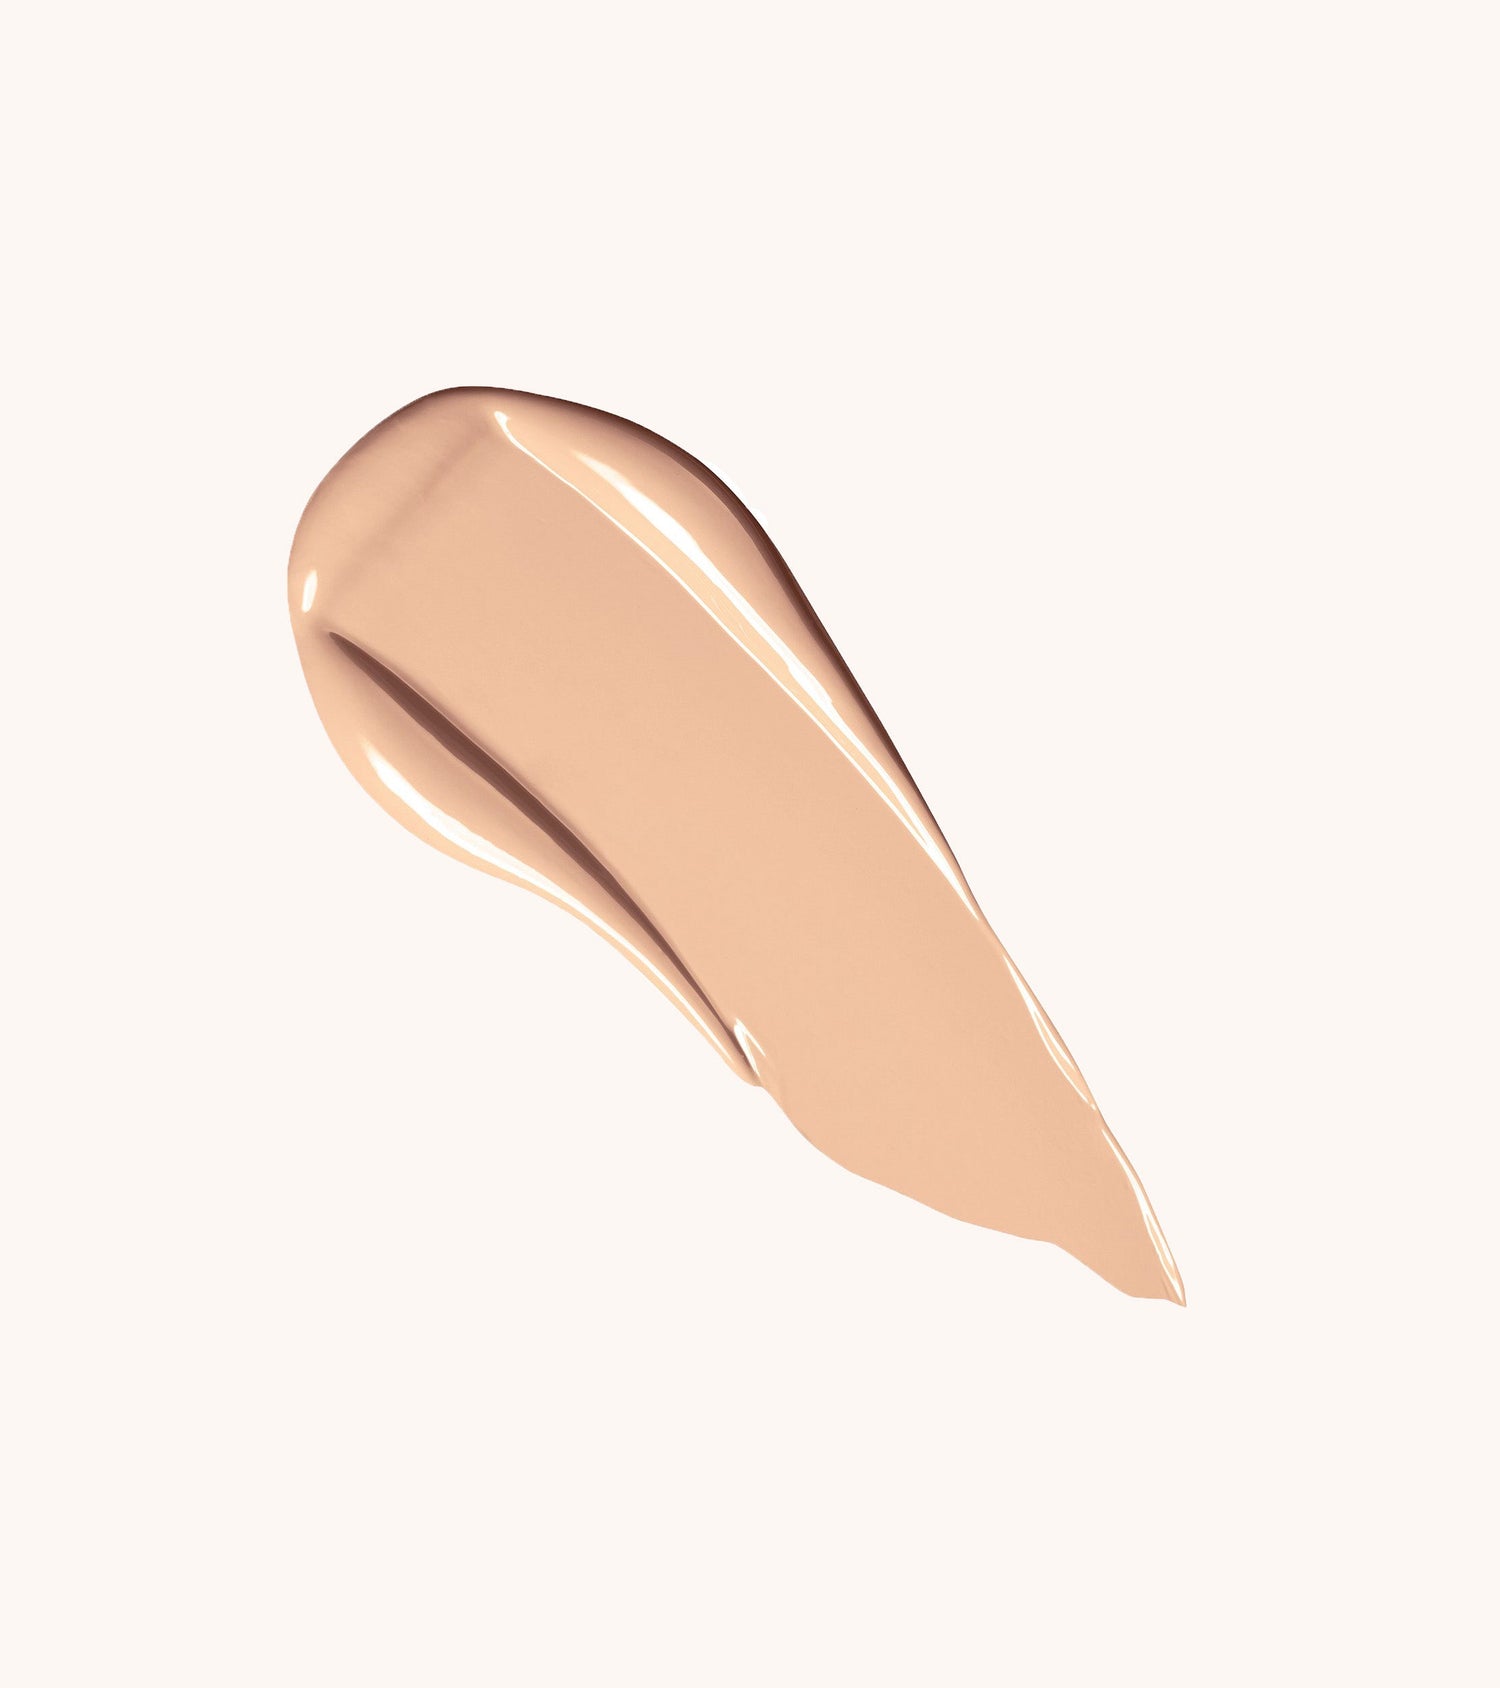 Authentik Skin Perfector Concealer (020 Accurate) Main Image featured